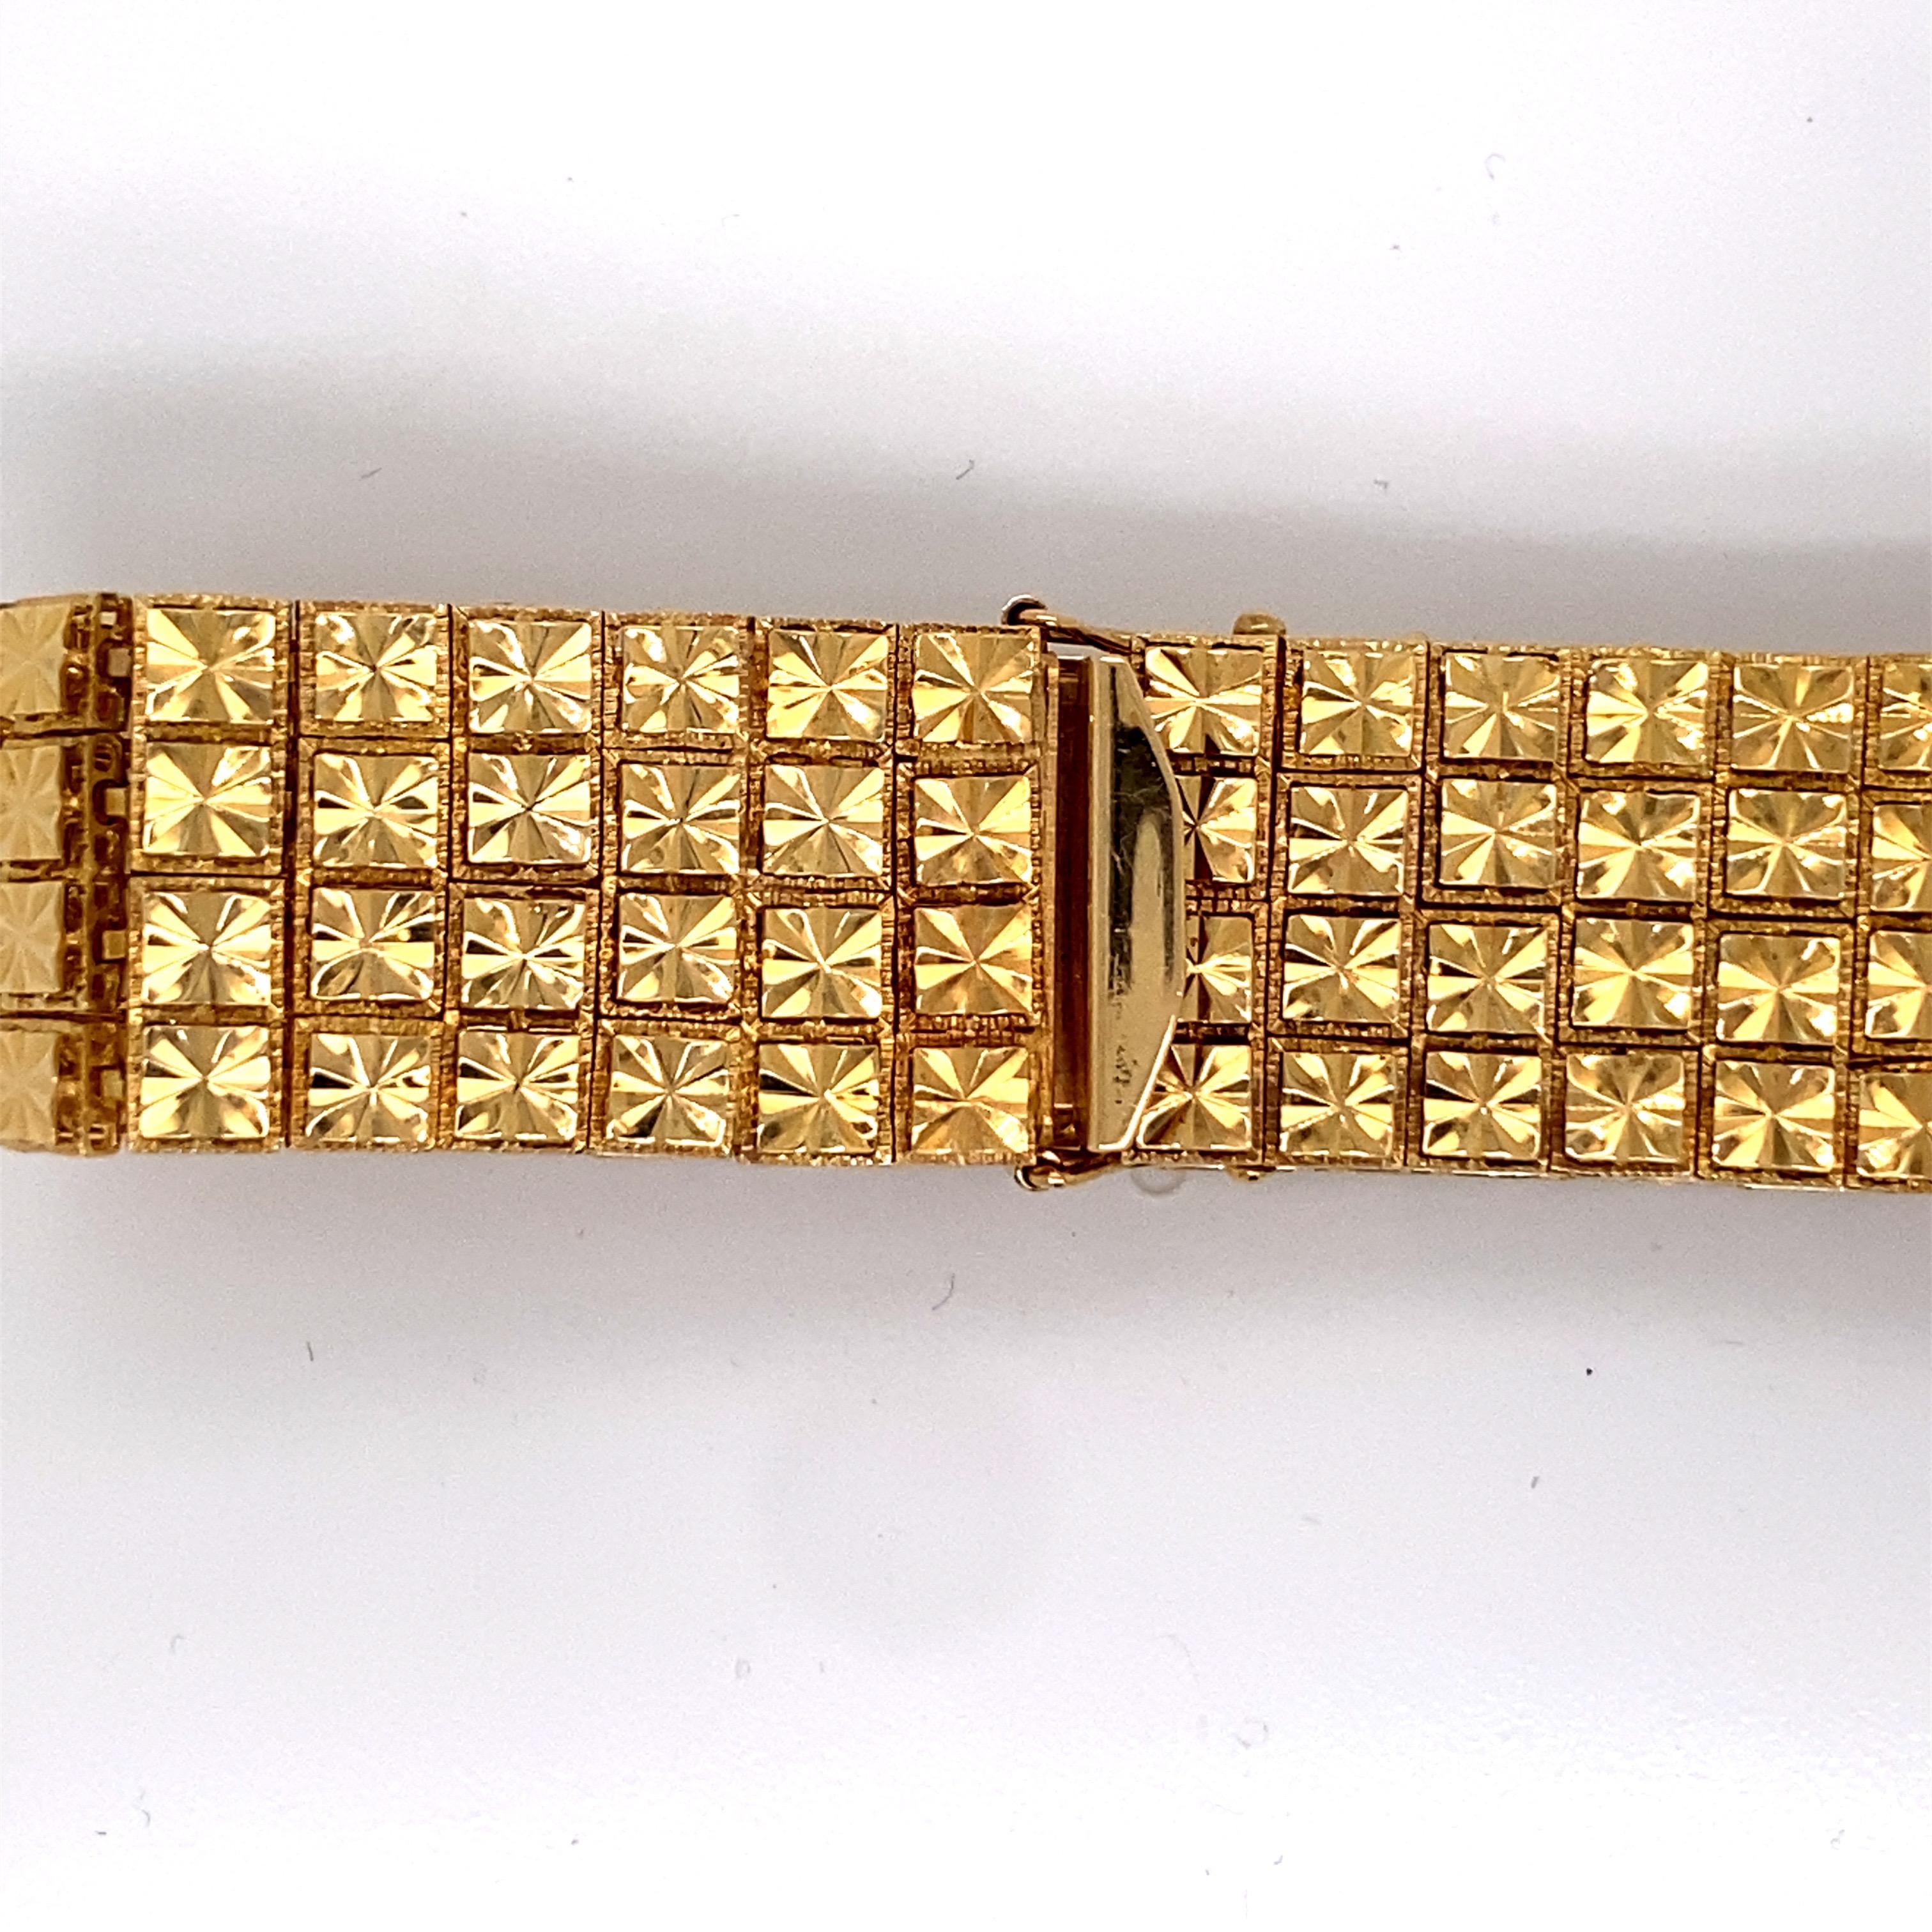 Vintage 1980s 14K Yellow gold Wide Link Bracelet - The bracelet measures 7.25 inches long and .70 inches wide and has a hidden clasp with push button for a continuous style. The links have flower designs. The bracelet weighs 31.8 grams.